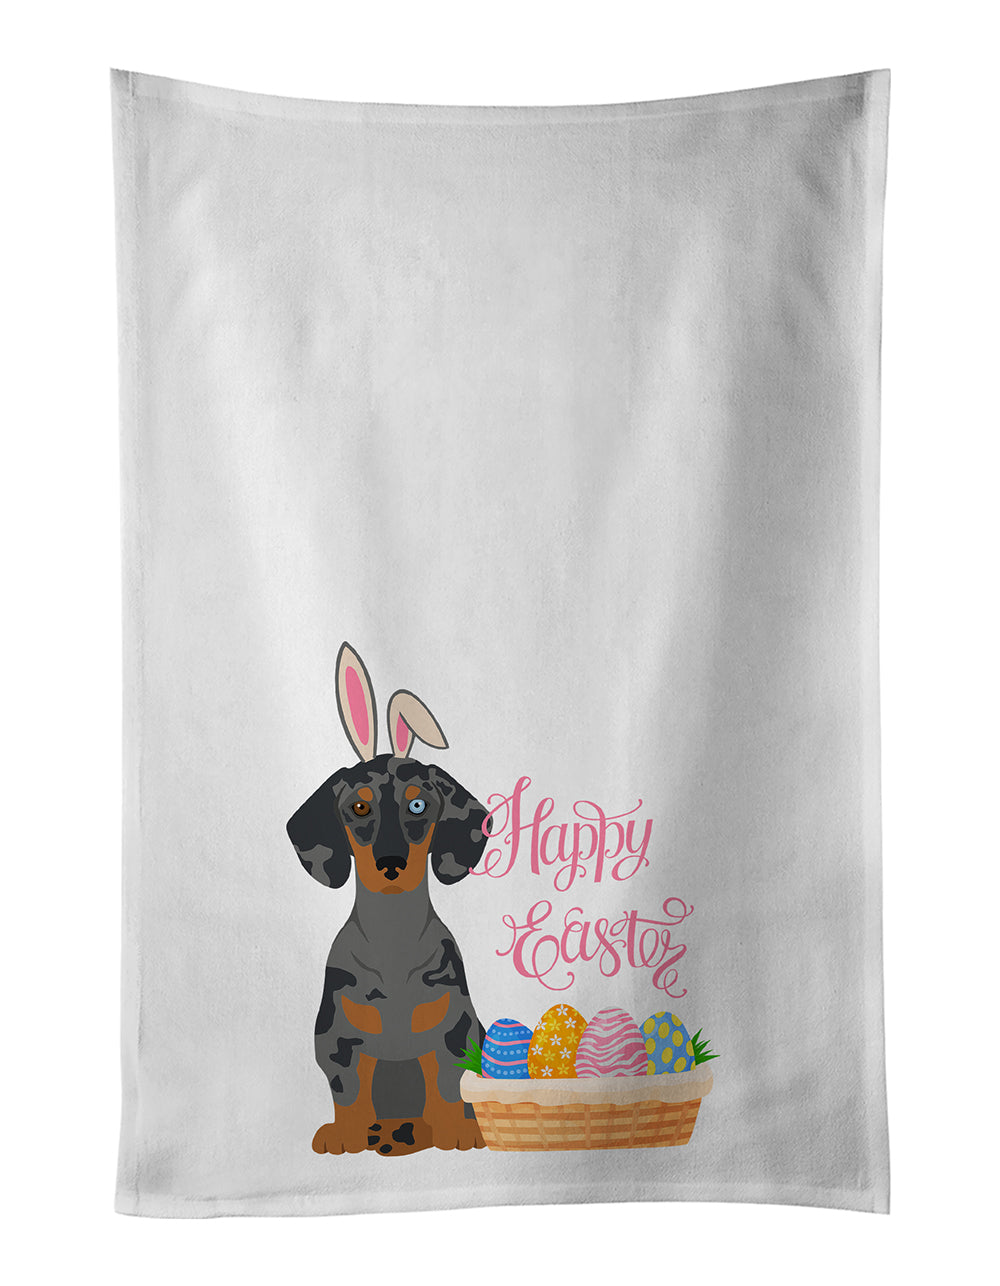 Buy this Black Dapple Dachshund Easter White Kitchen Towel Set of 2 Dish Towels